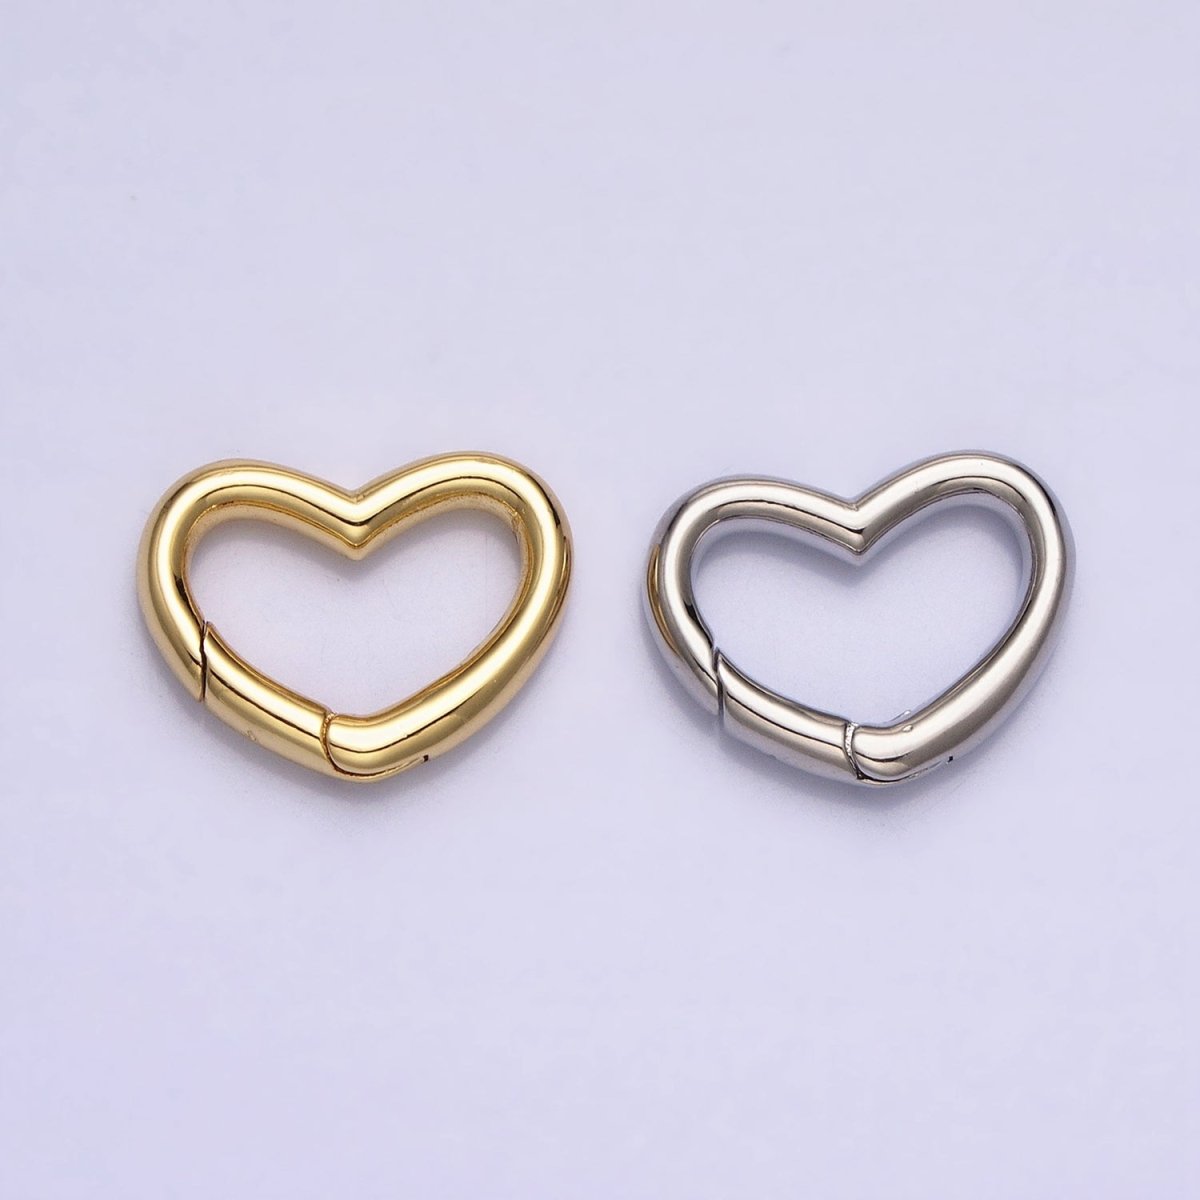 Dainty Gold Spring Gate Ring, Push Gate ring, 16.6x13mm Heart Clasp Charm Holder Gold SilverClasp for Link Chain Connector Z-173 Z-174 - DLUXCA